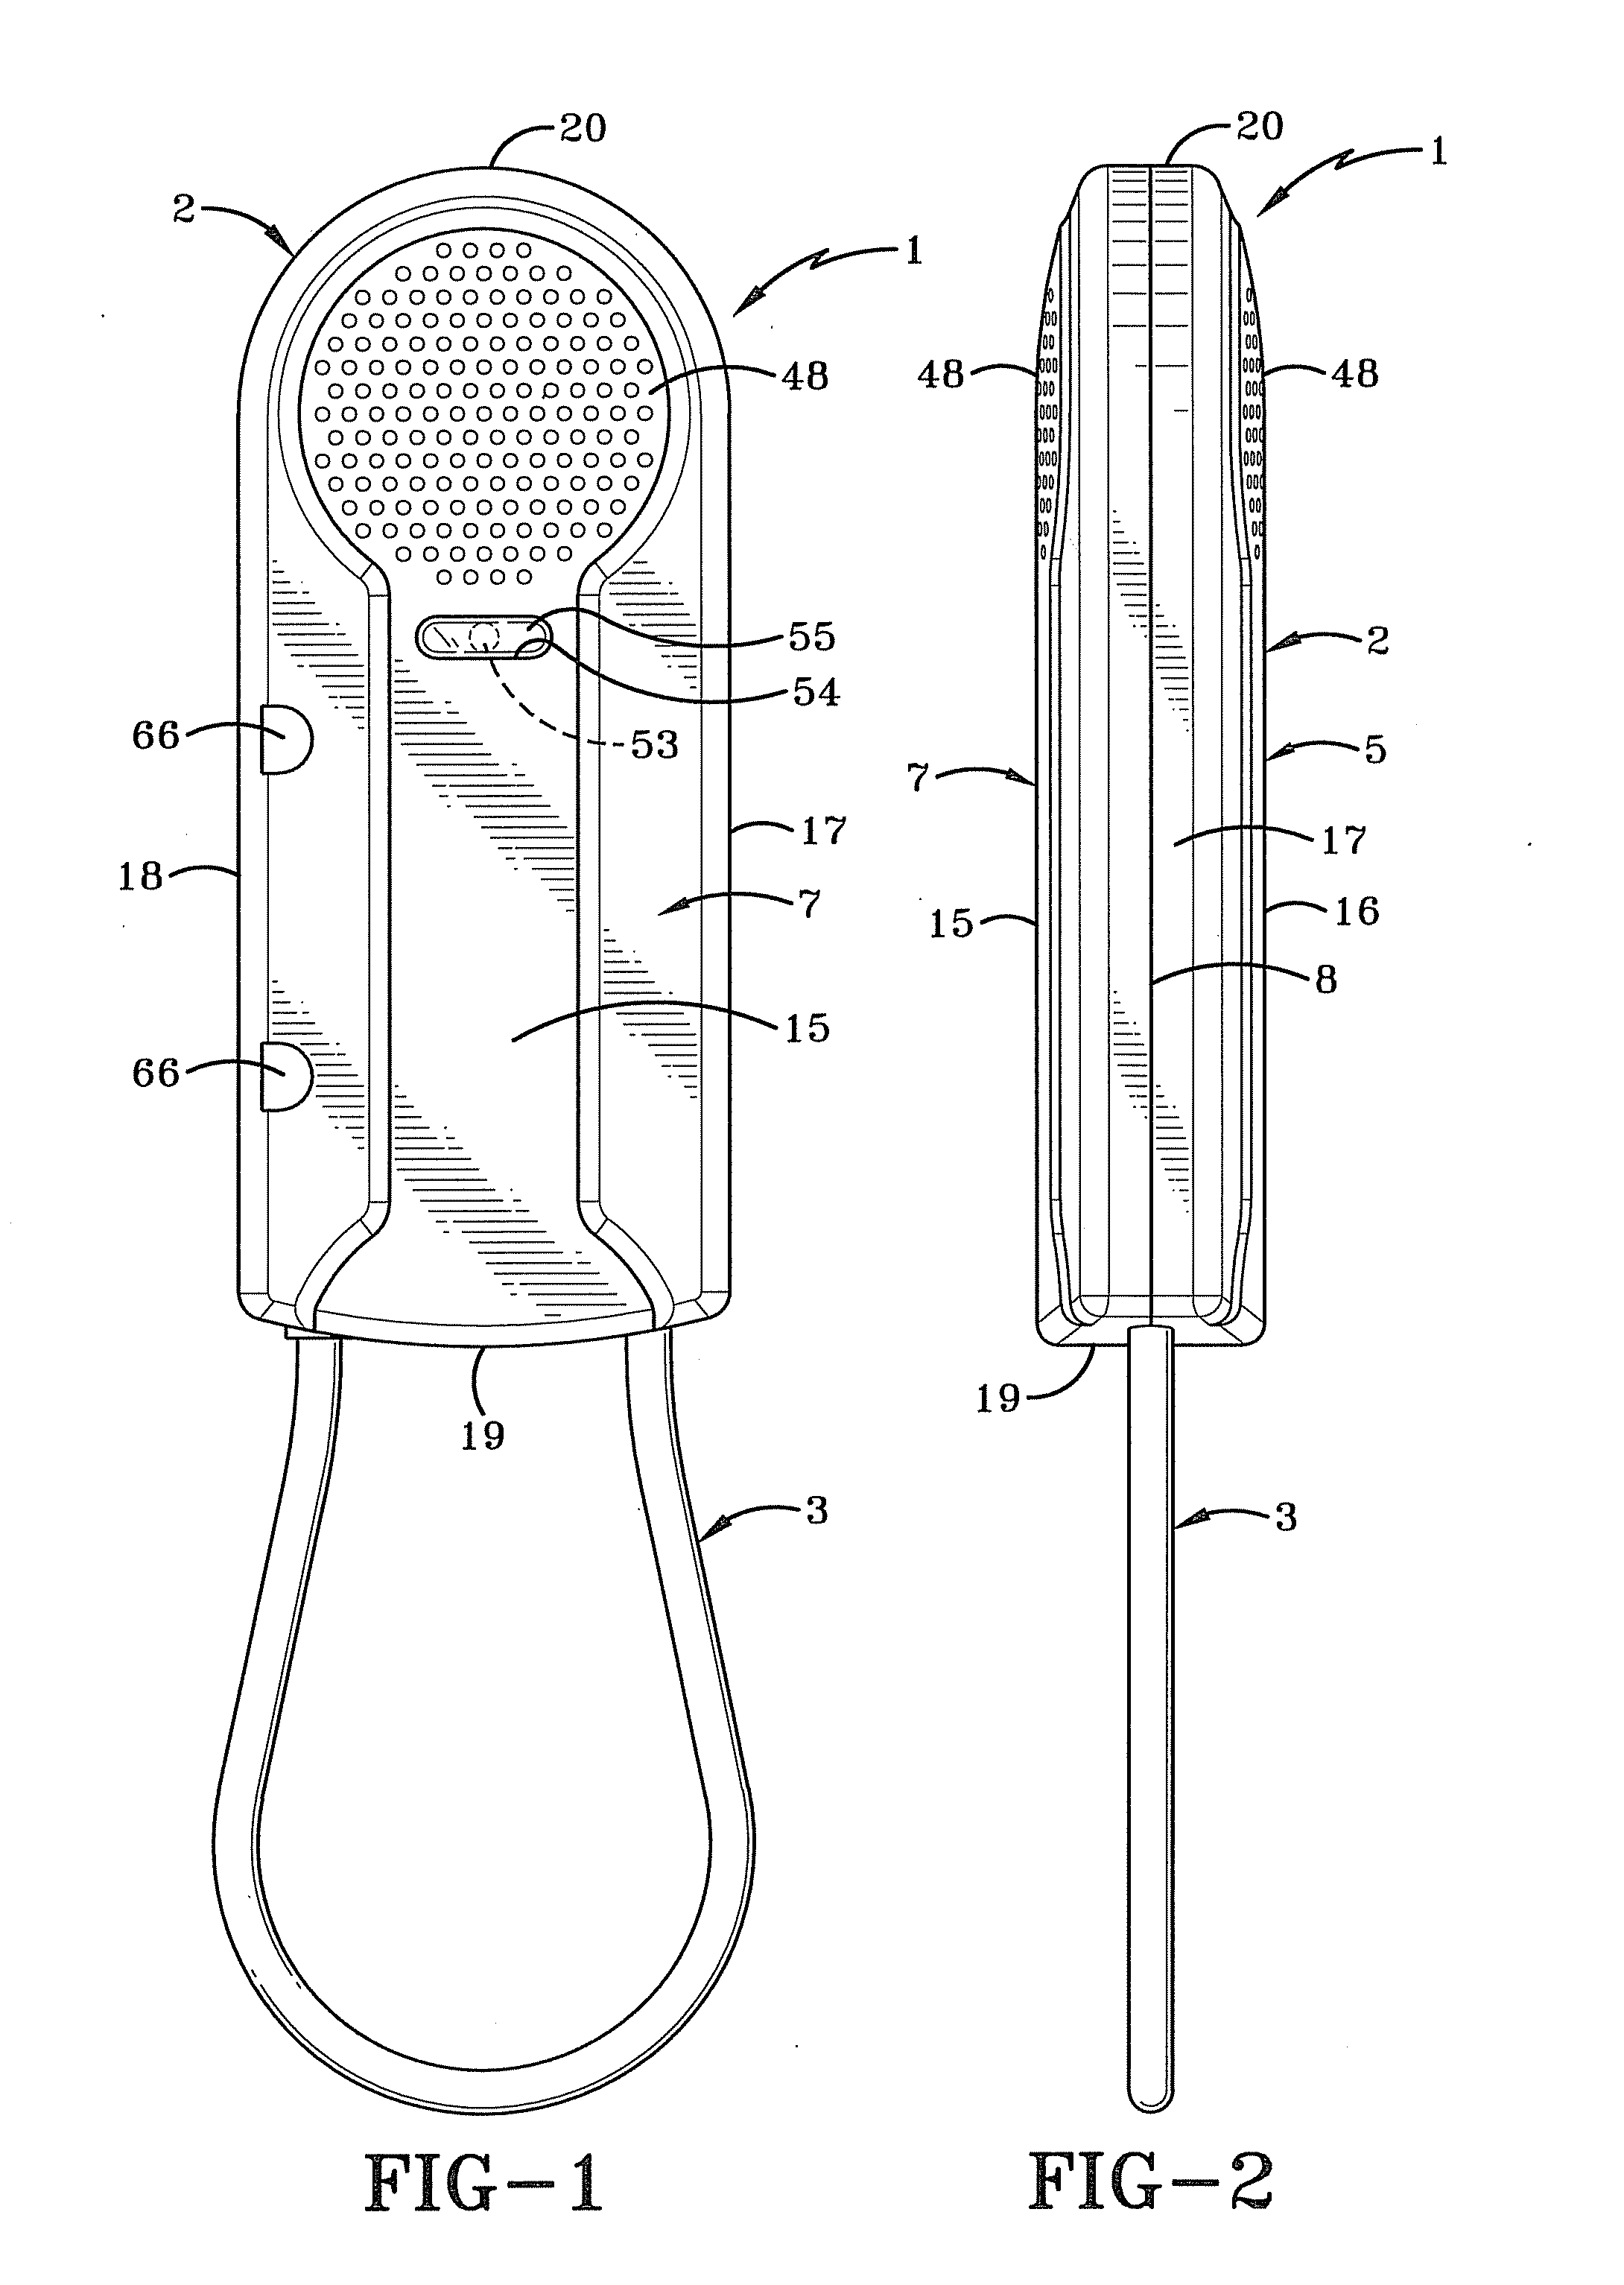 Cable lock with integral connected metal sheath